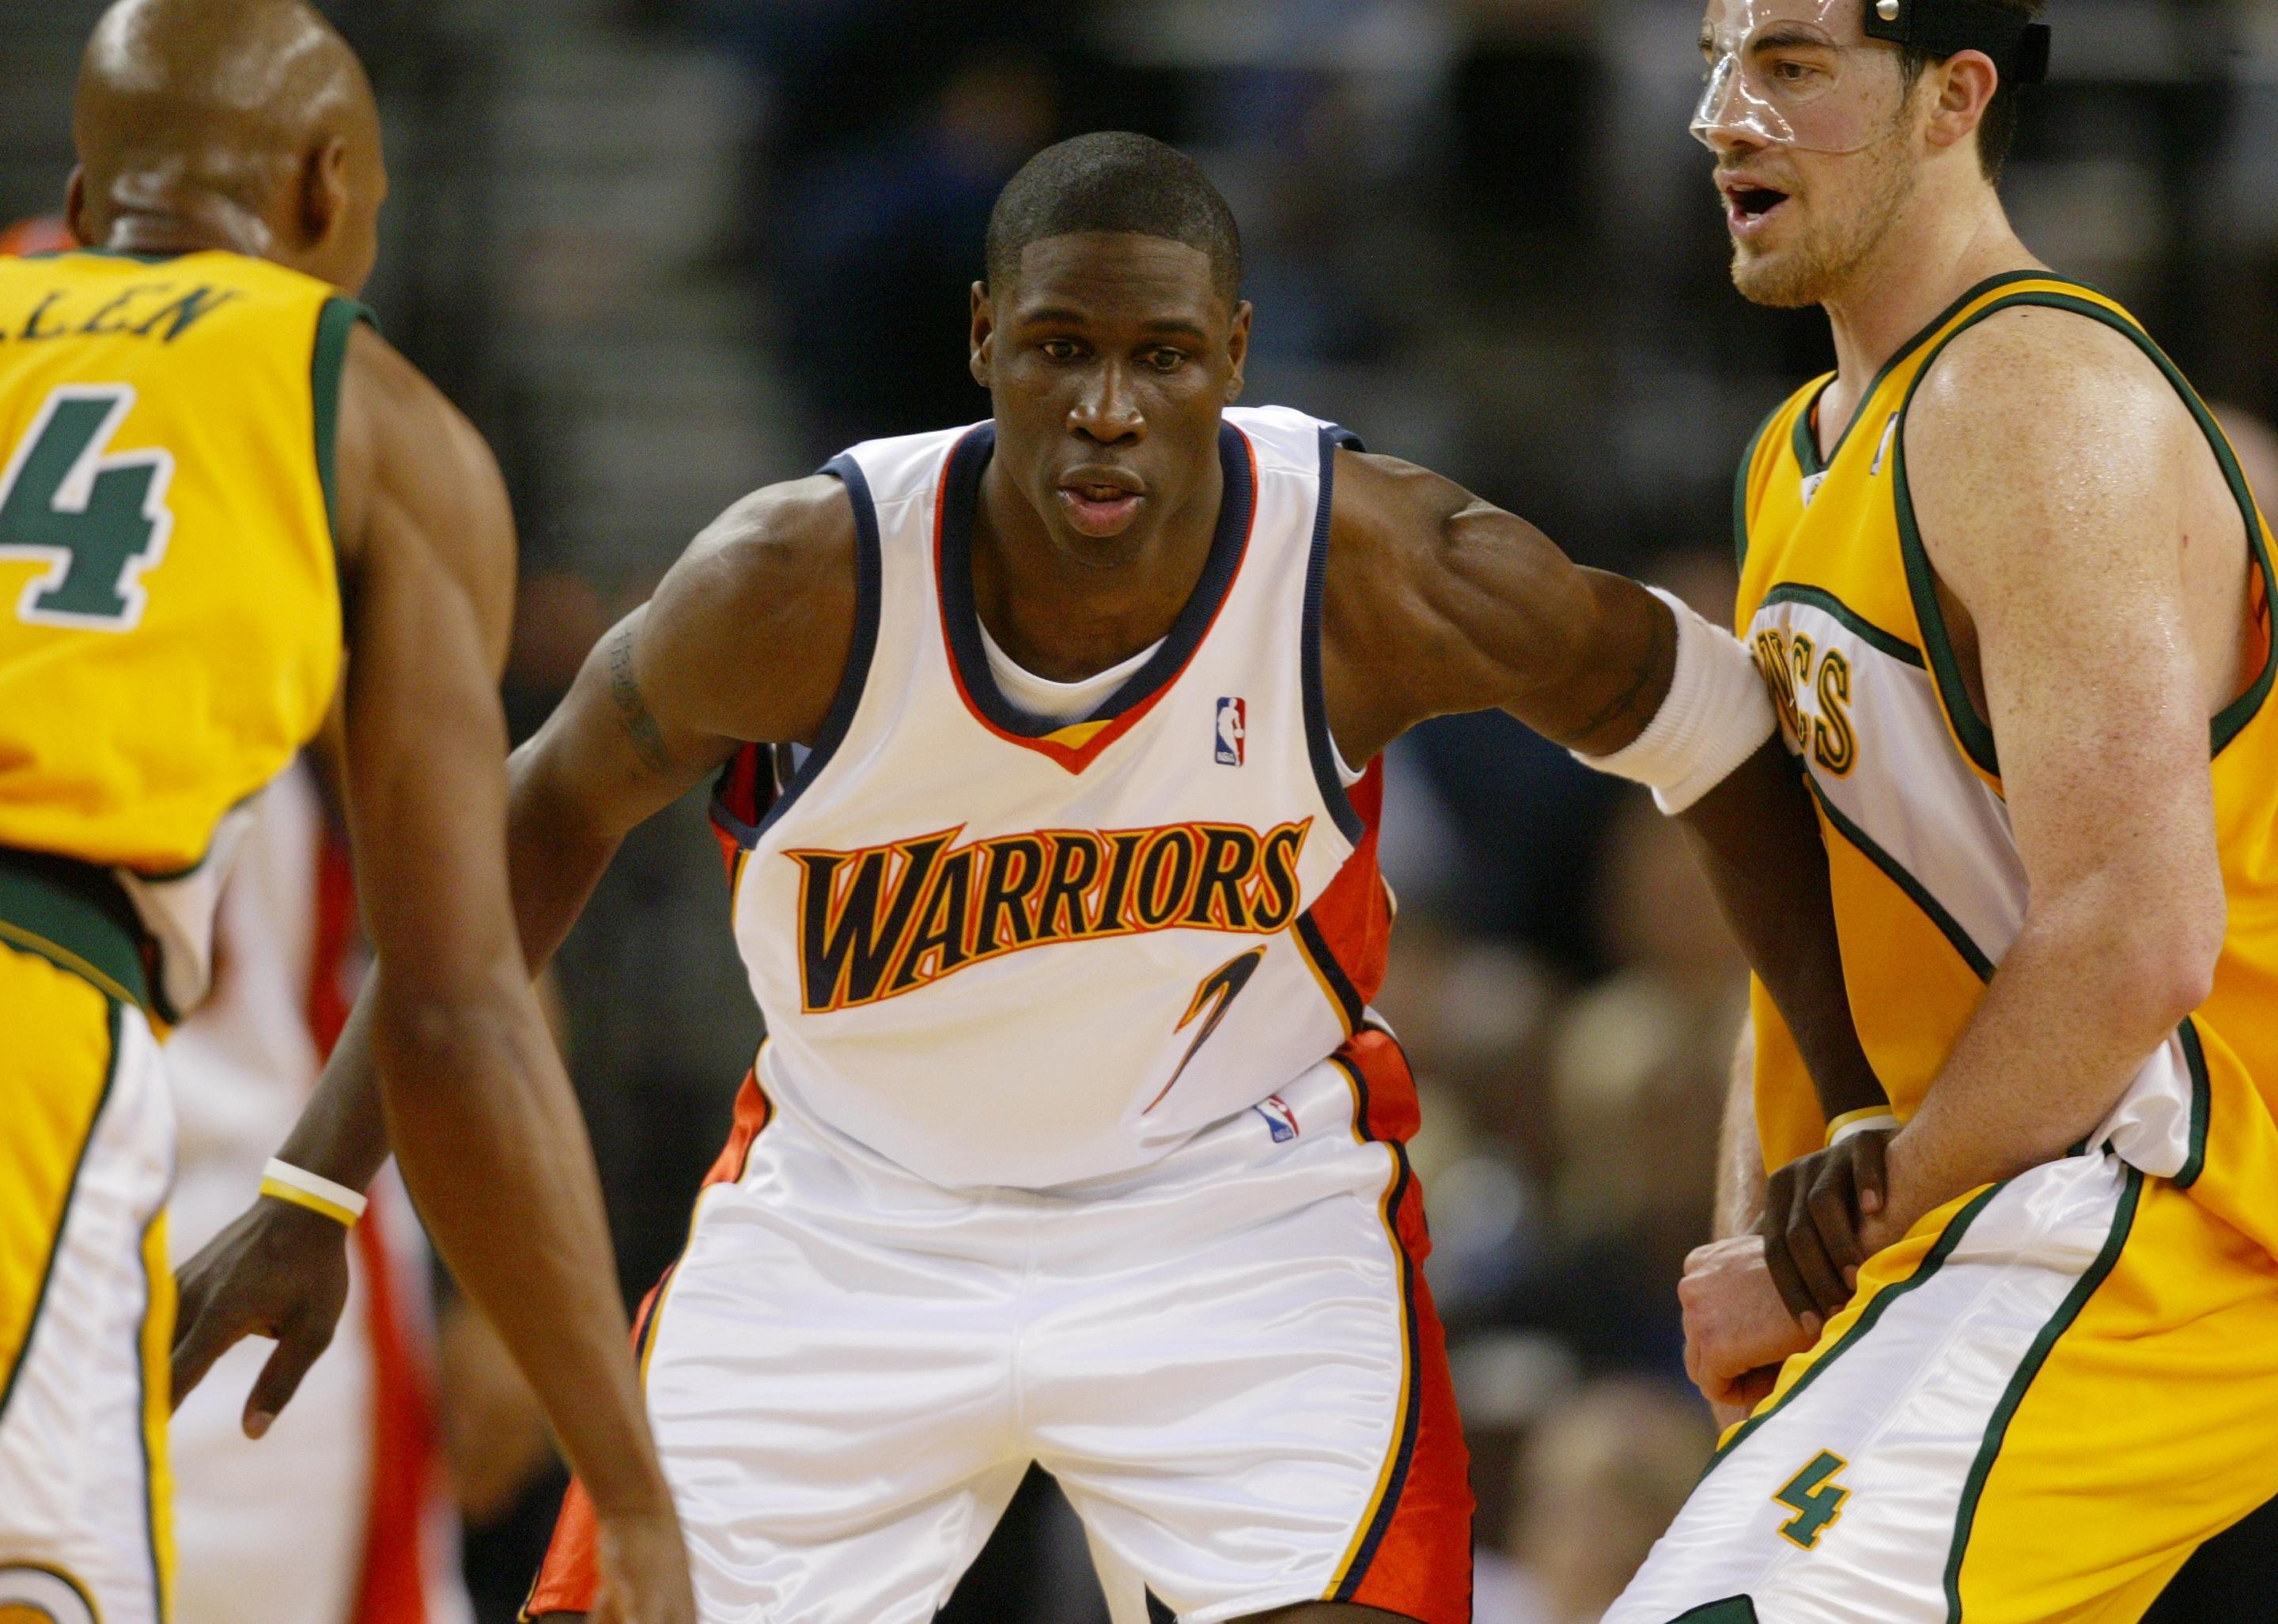 Mickael Pietrus during a game at Oakland Arena.